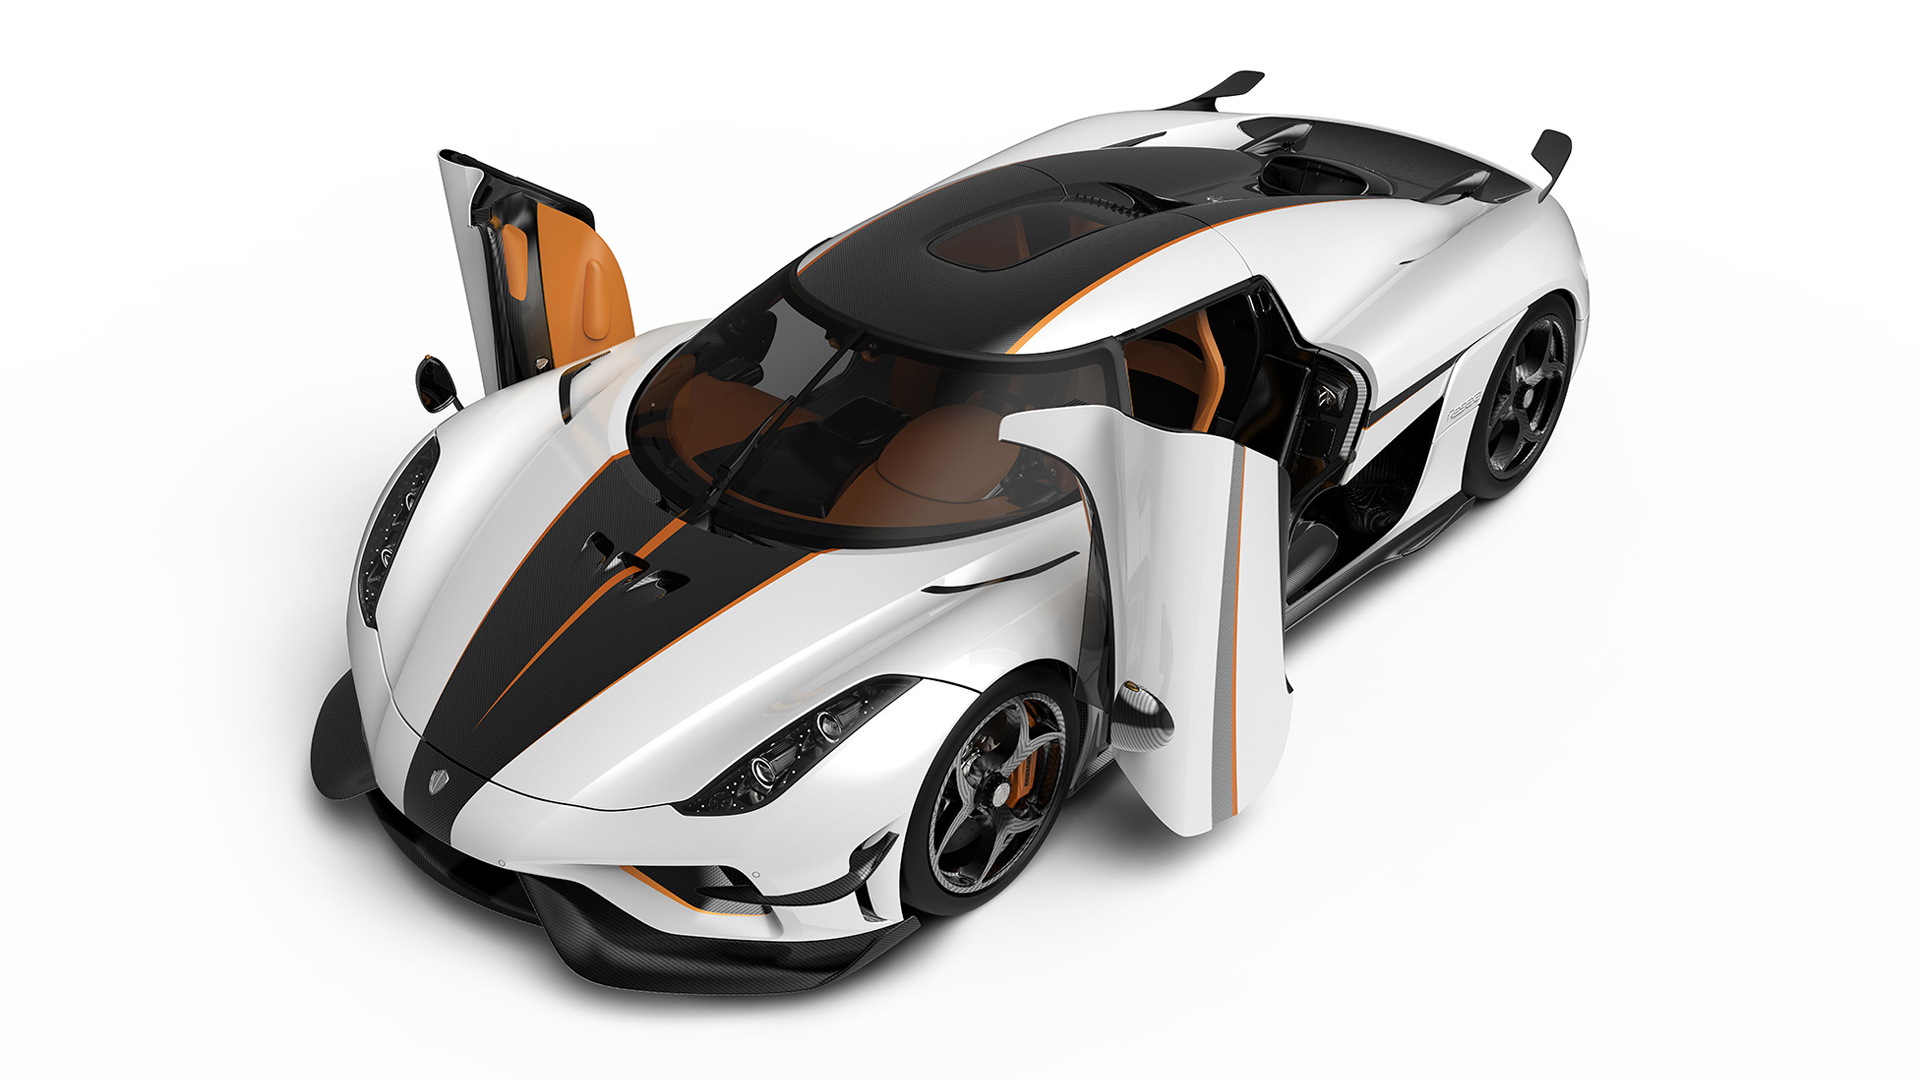 Koenigsegg Regera with Ghost high-downforce package